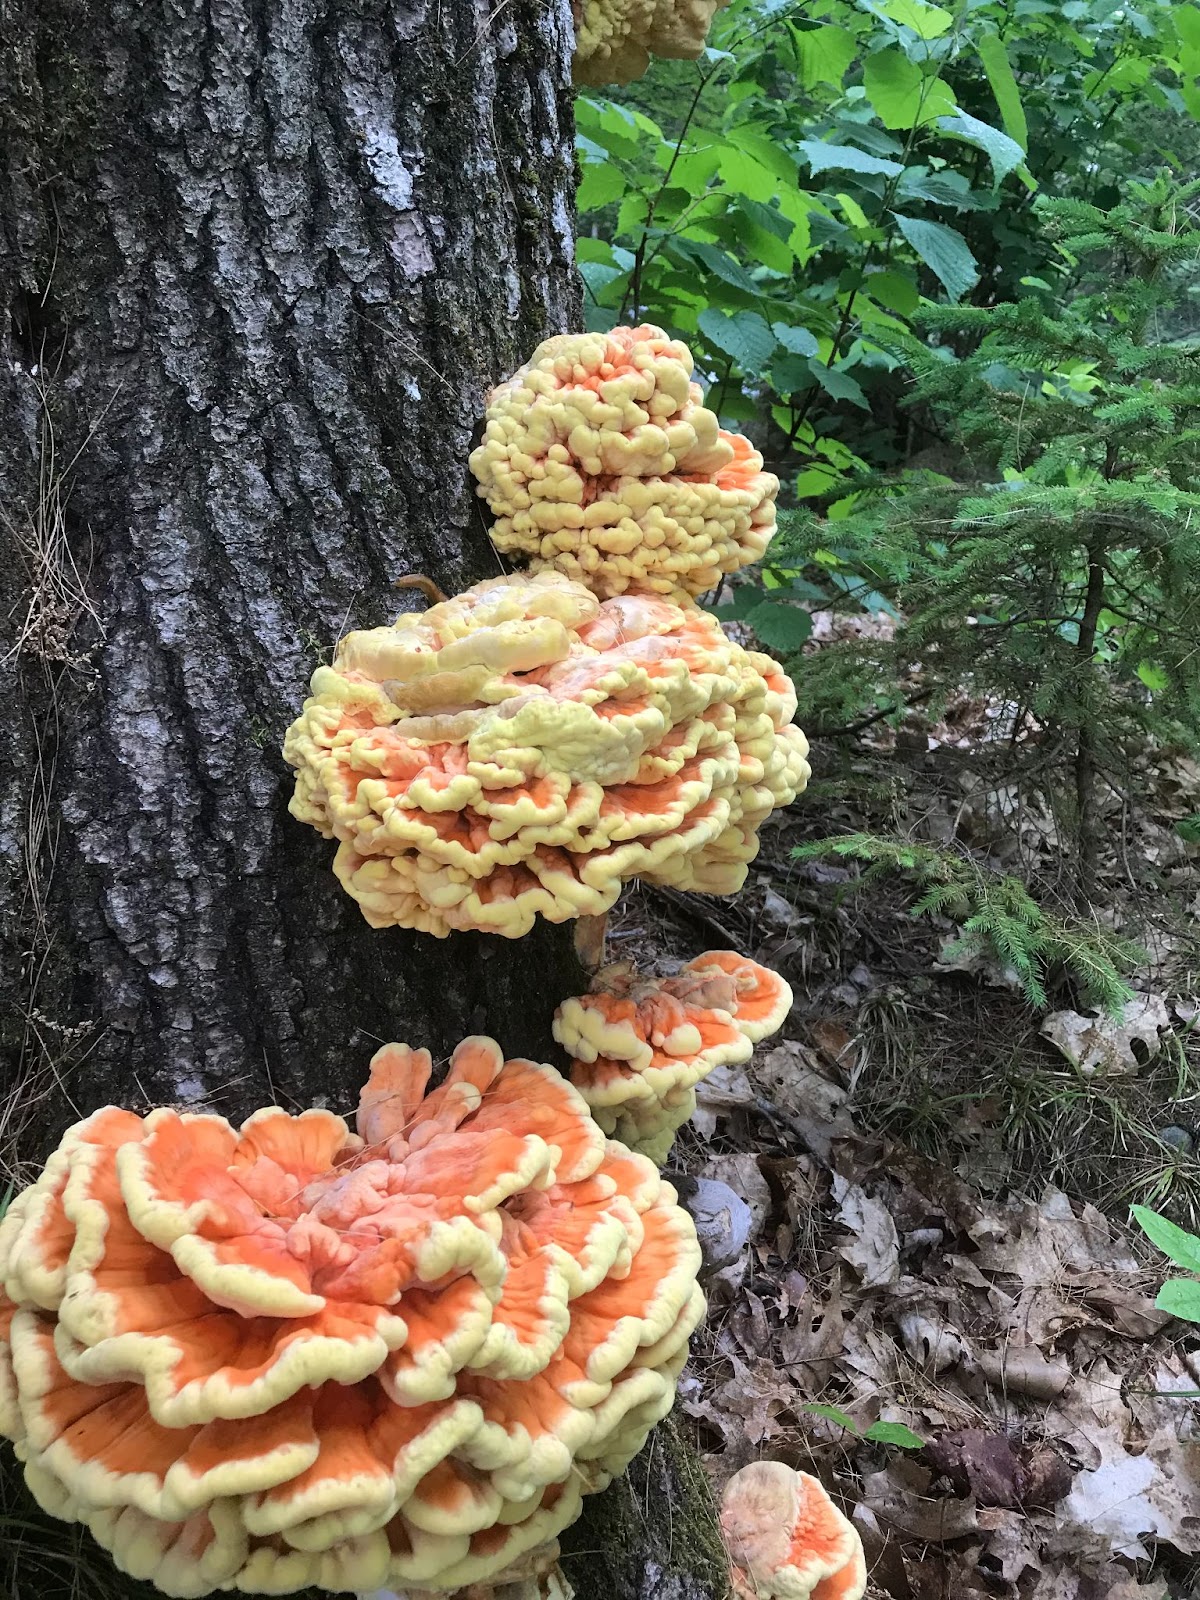 Chicken-of-the-Woods and Other Marvelous Mushrooms